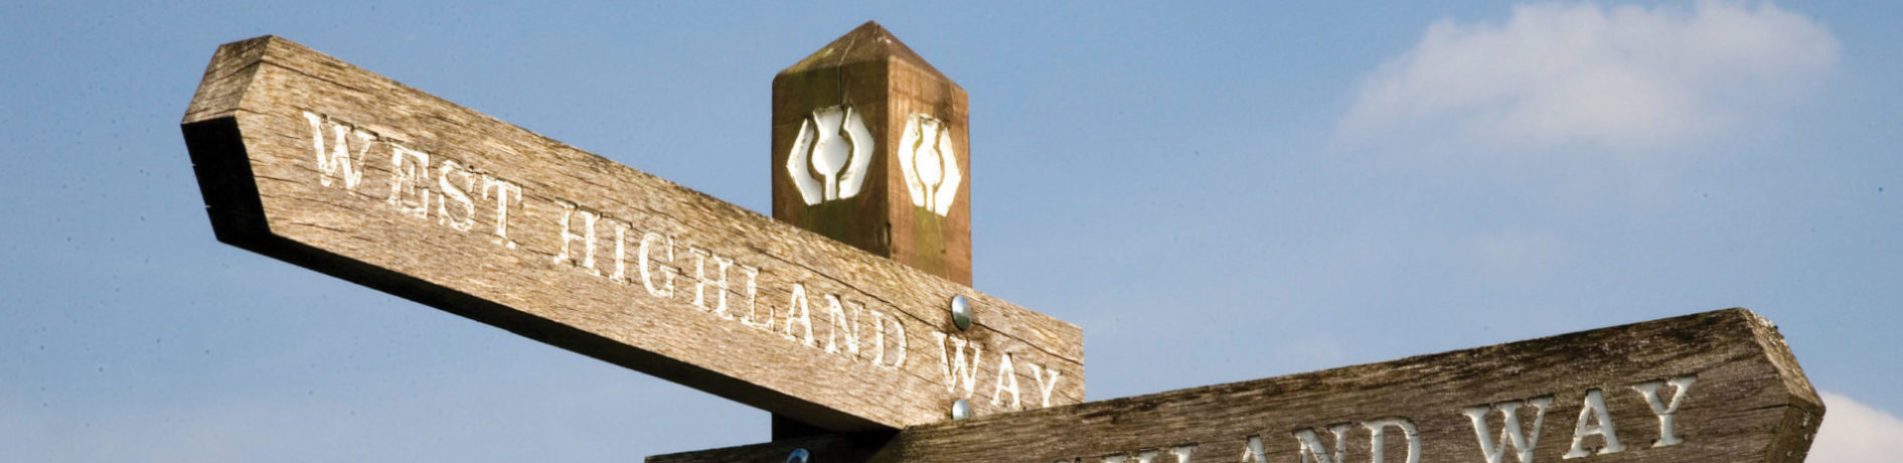 west-highland-way-wooden-path-indicators-at-crossroads-with-thistle-symbol-prominent